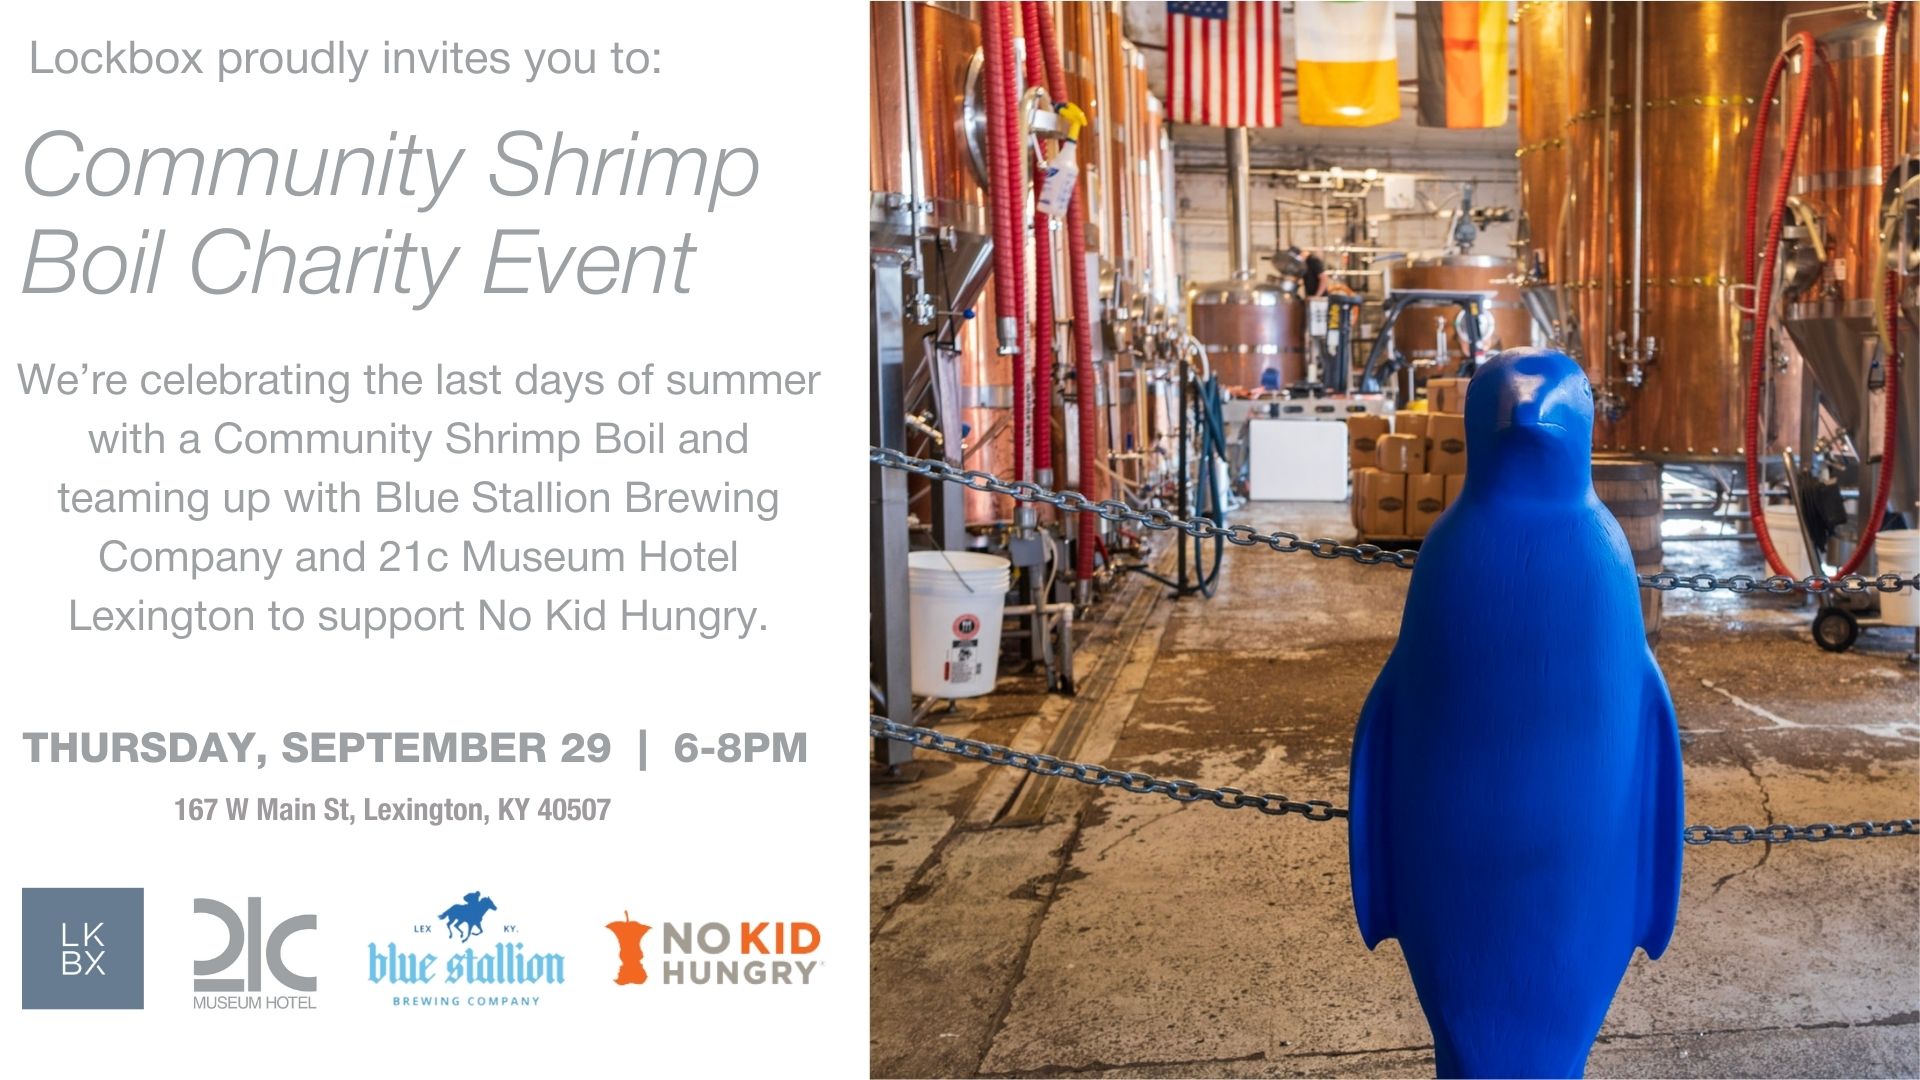 photo of penguin in a brewery with event information